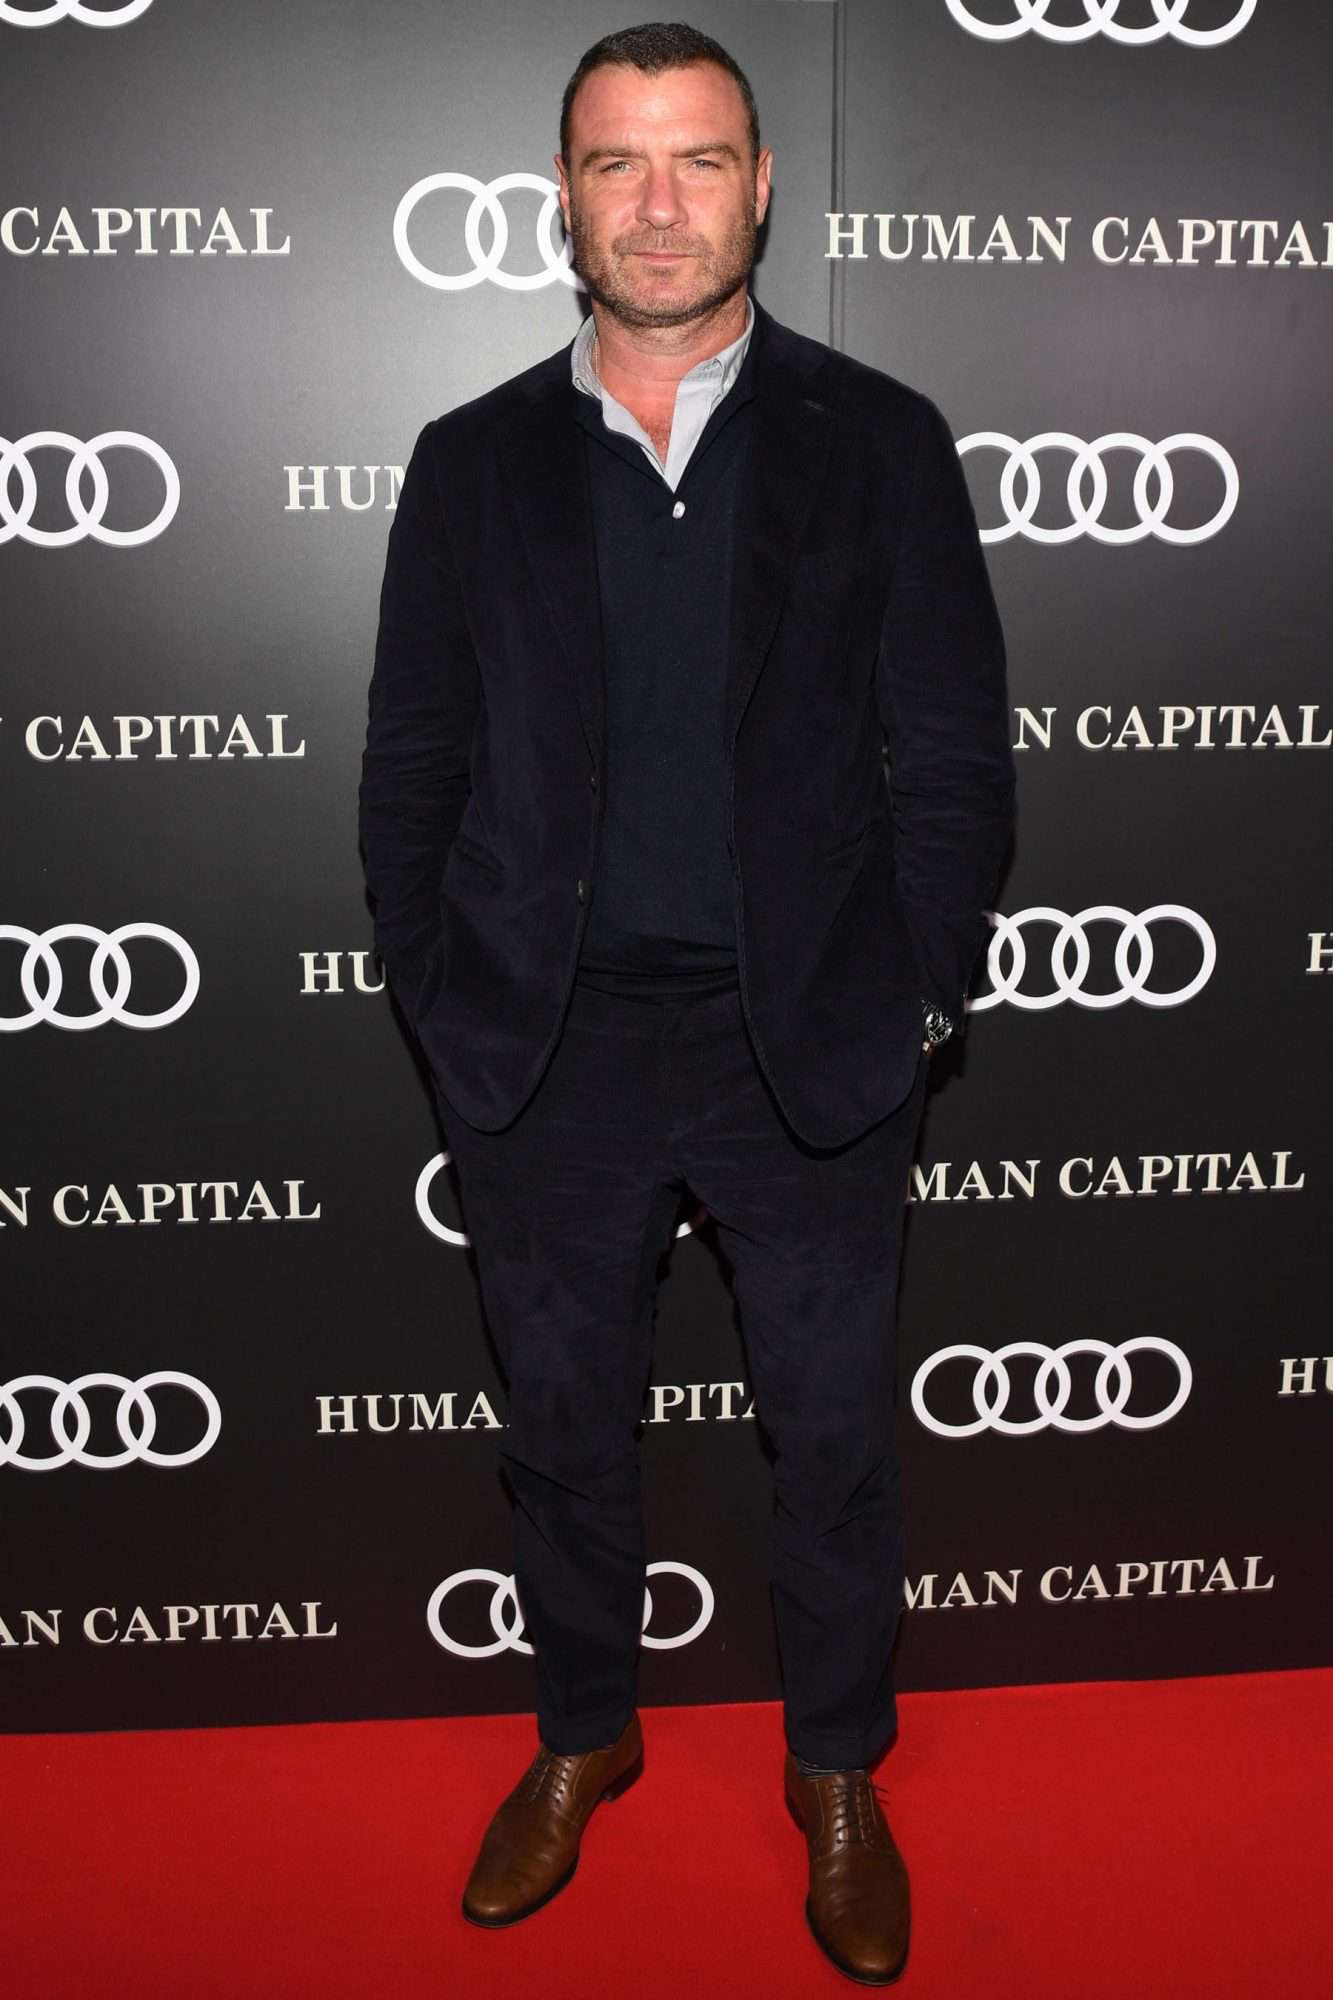 Audi Canada Hosts The Post-Screening Event For "Human Capital" During The Toronto International Film Festival